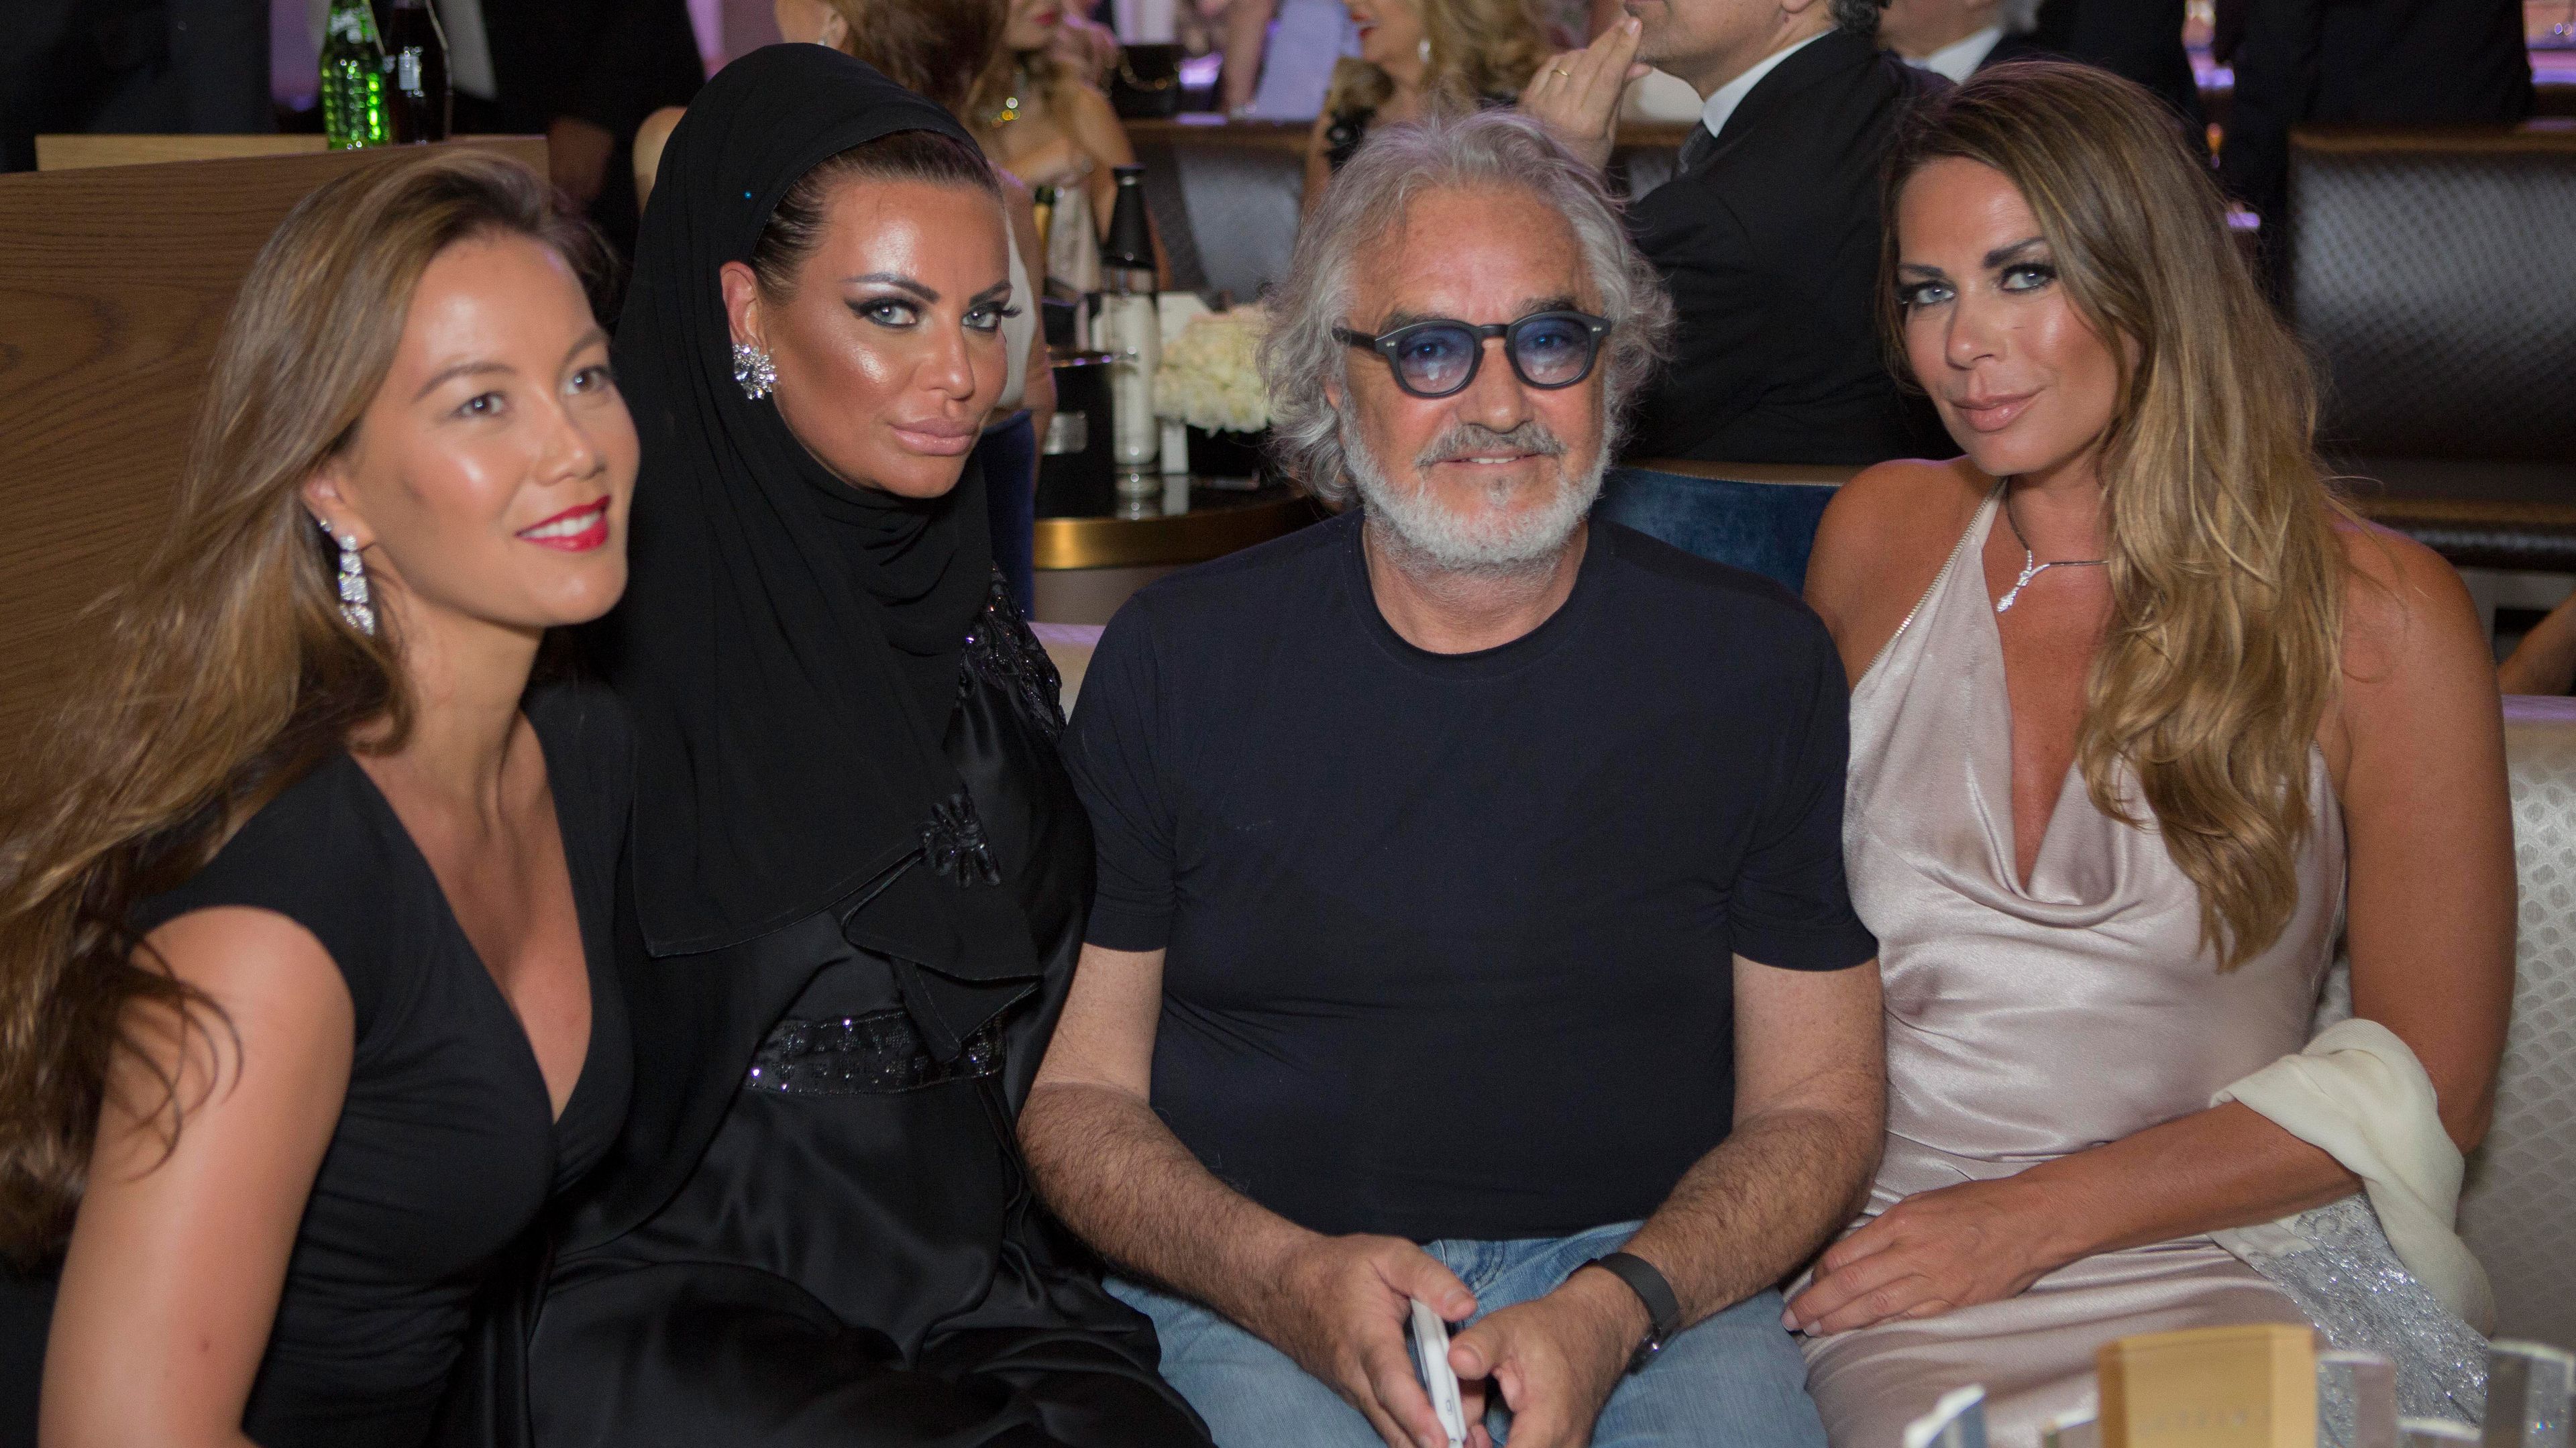 Flavio Briatore with guests during a business event in Dubai in 2016.